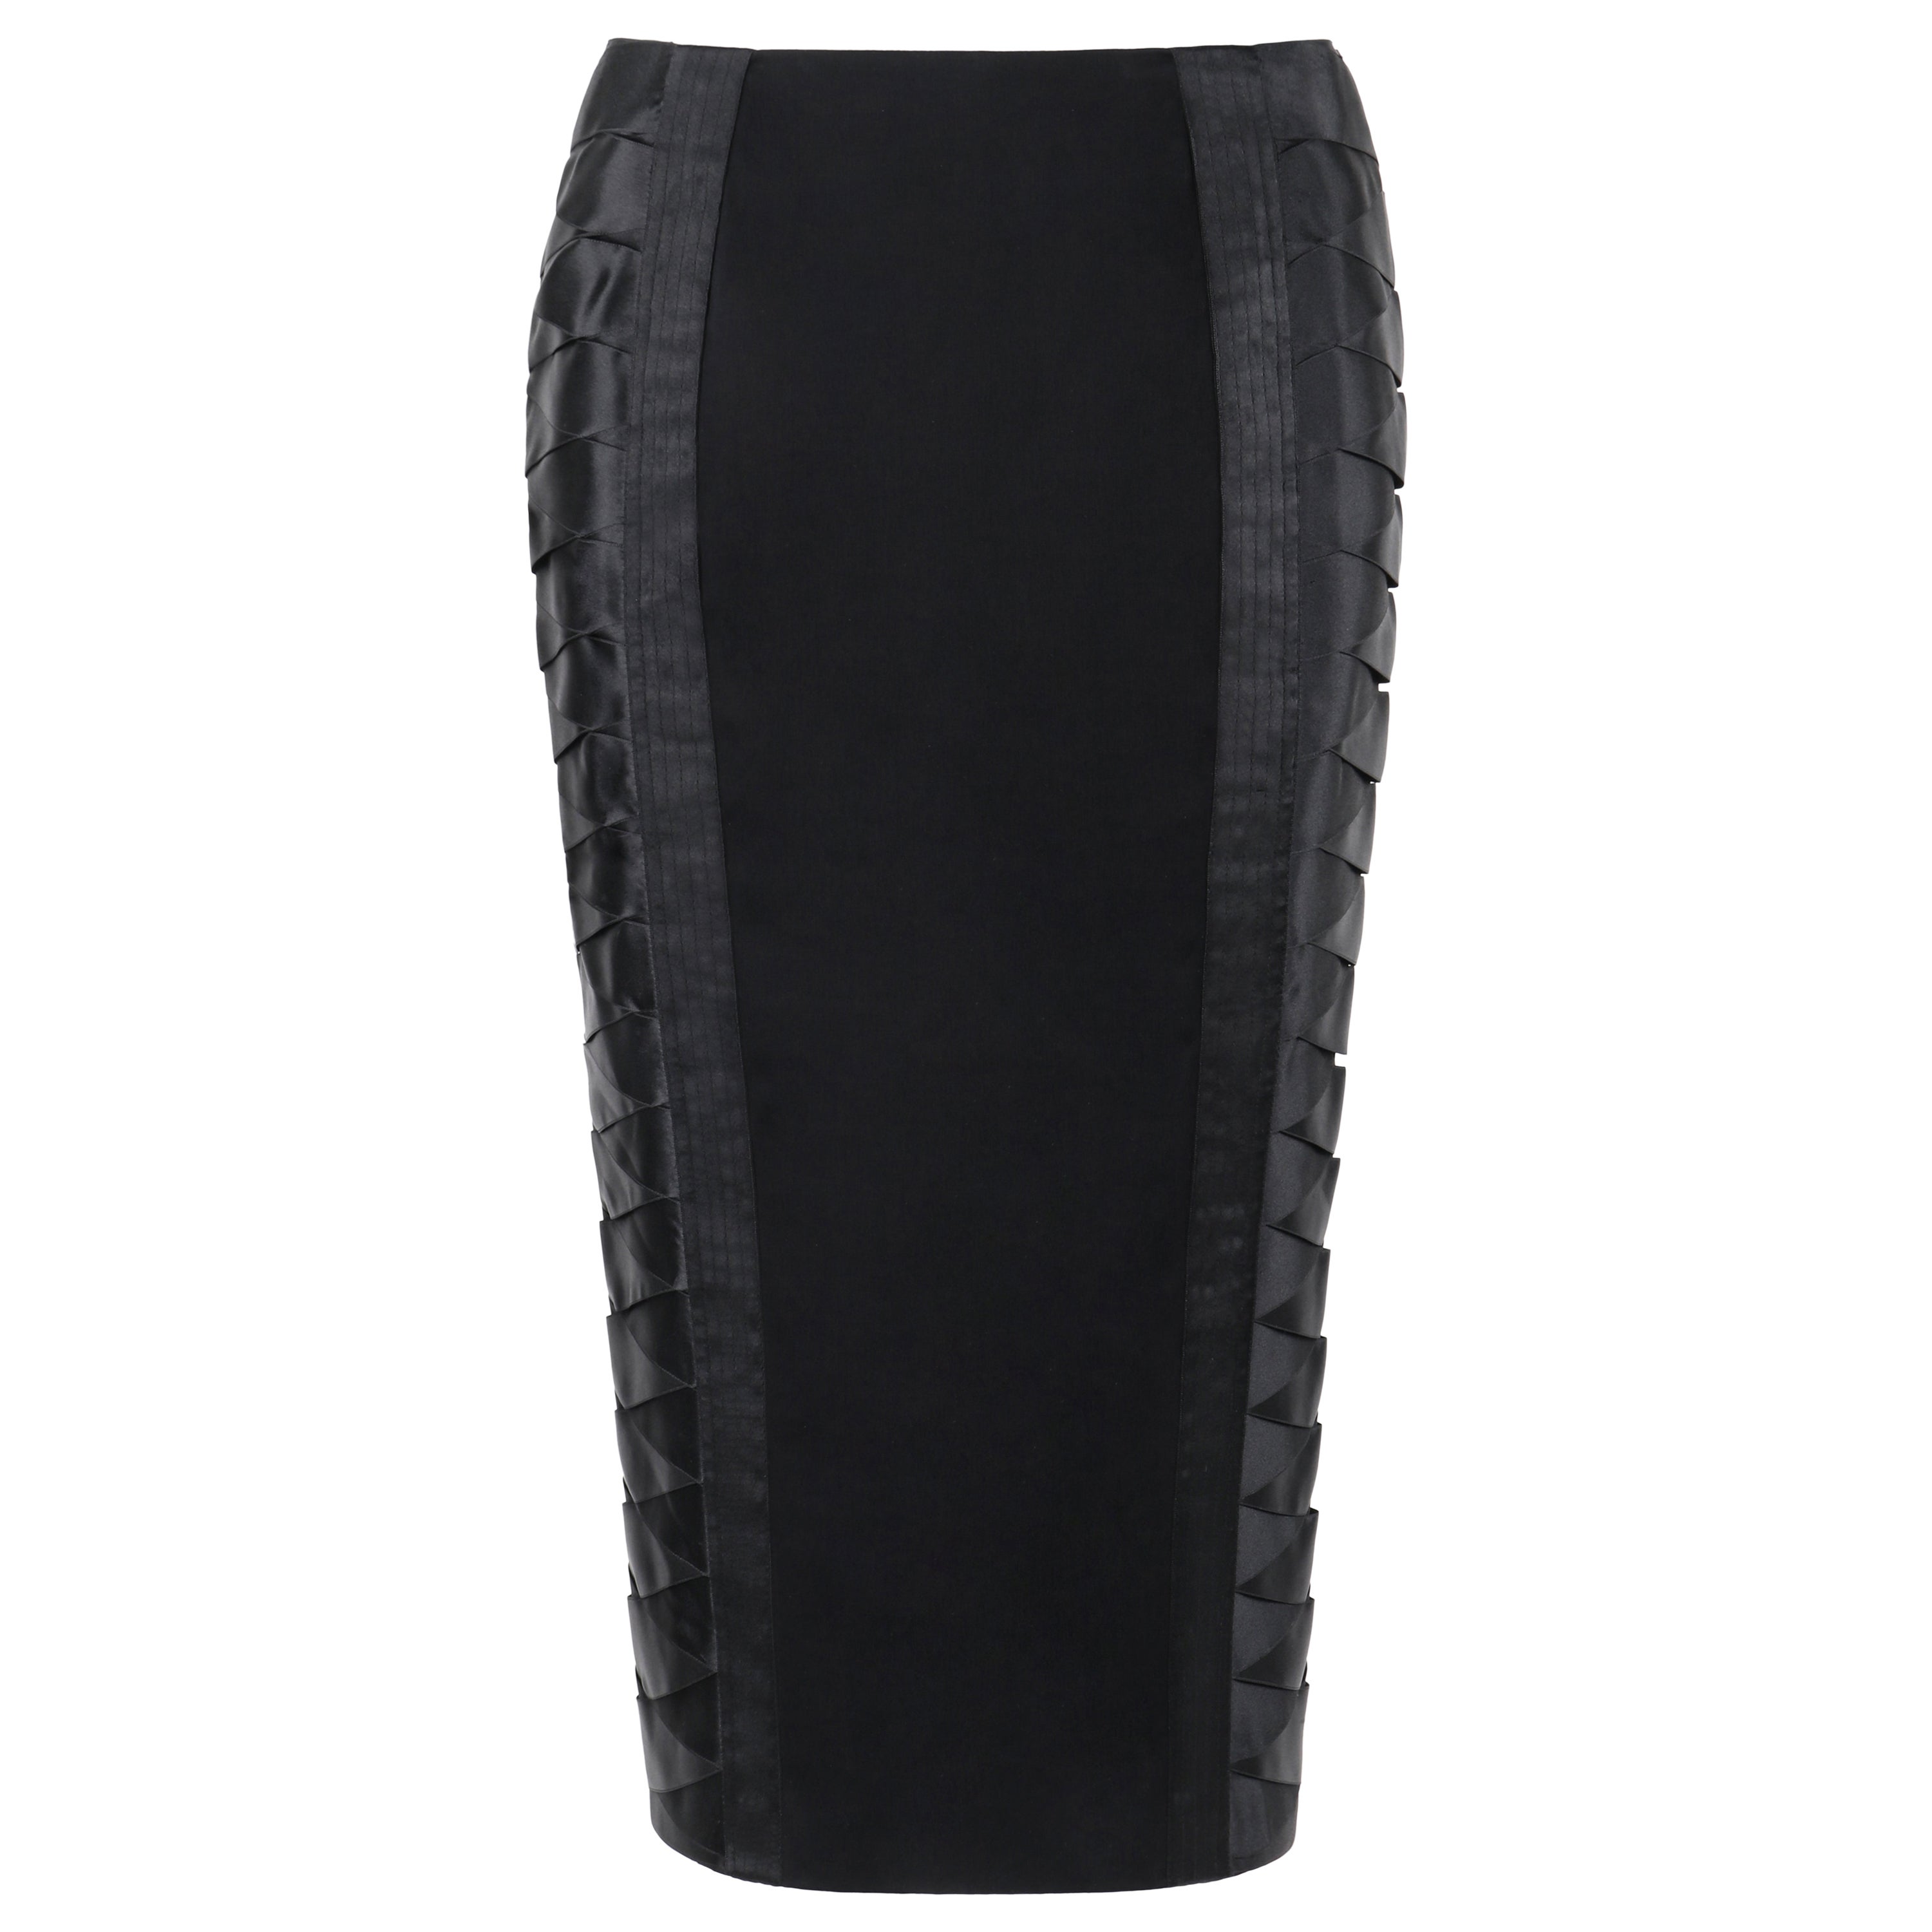 ALEXANDER McQUEEN A/W 2005 "Man Who Knew Too Much" Black Lace-up Pencil Skirt  For Sale